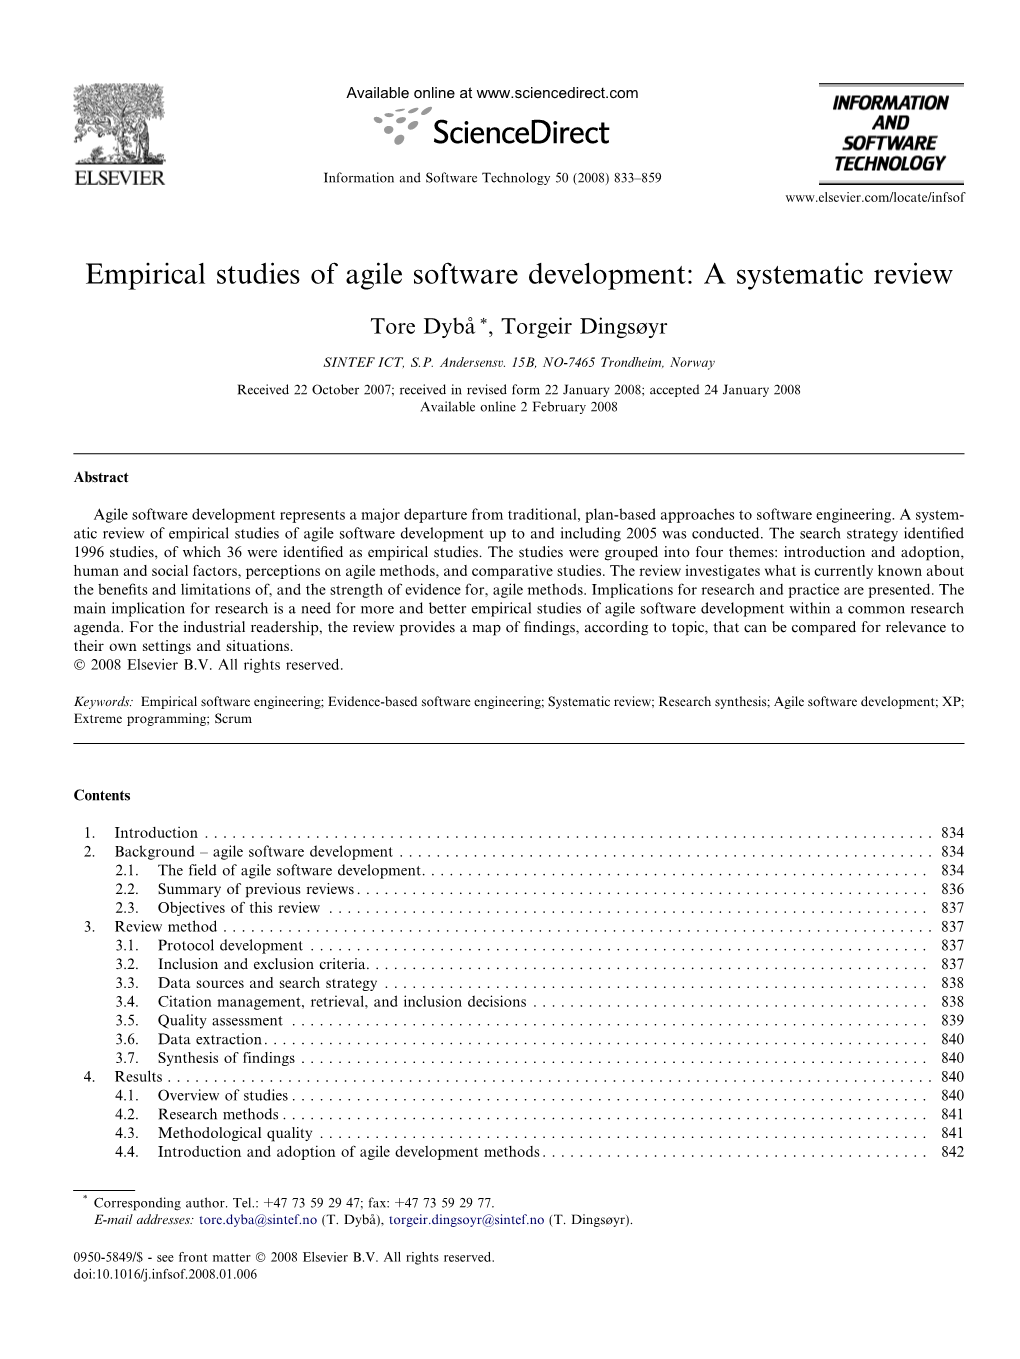 Empirical Studies of Agile Software Development: a Systematic Review